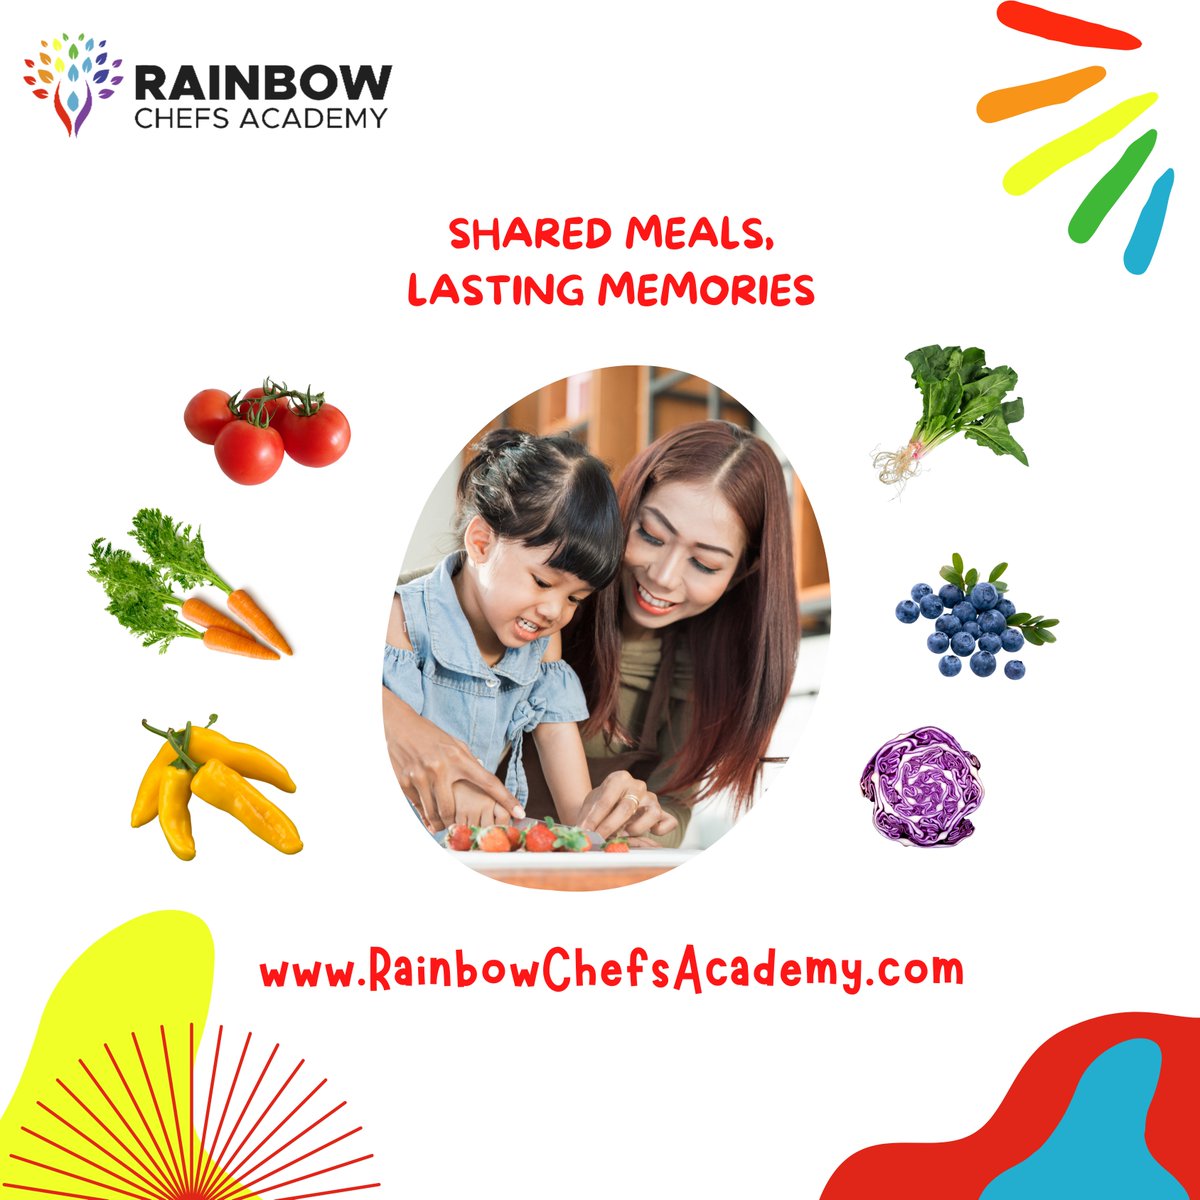 There's something truly magical about cooking together, gathering around the table with loved ones, sharing delicious food, and creating cherished moments. 

EDUCATE. EMPOWER. EAT. ⁣⁣⁣⁣⁣⁣⁣⁣⁣
⁣⁣
🌈 ❤️⁣⁣⁣ ⁣⁣⁣

#RainbowChefsAcademy